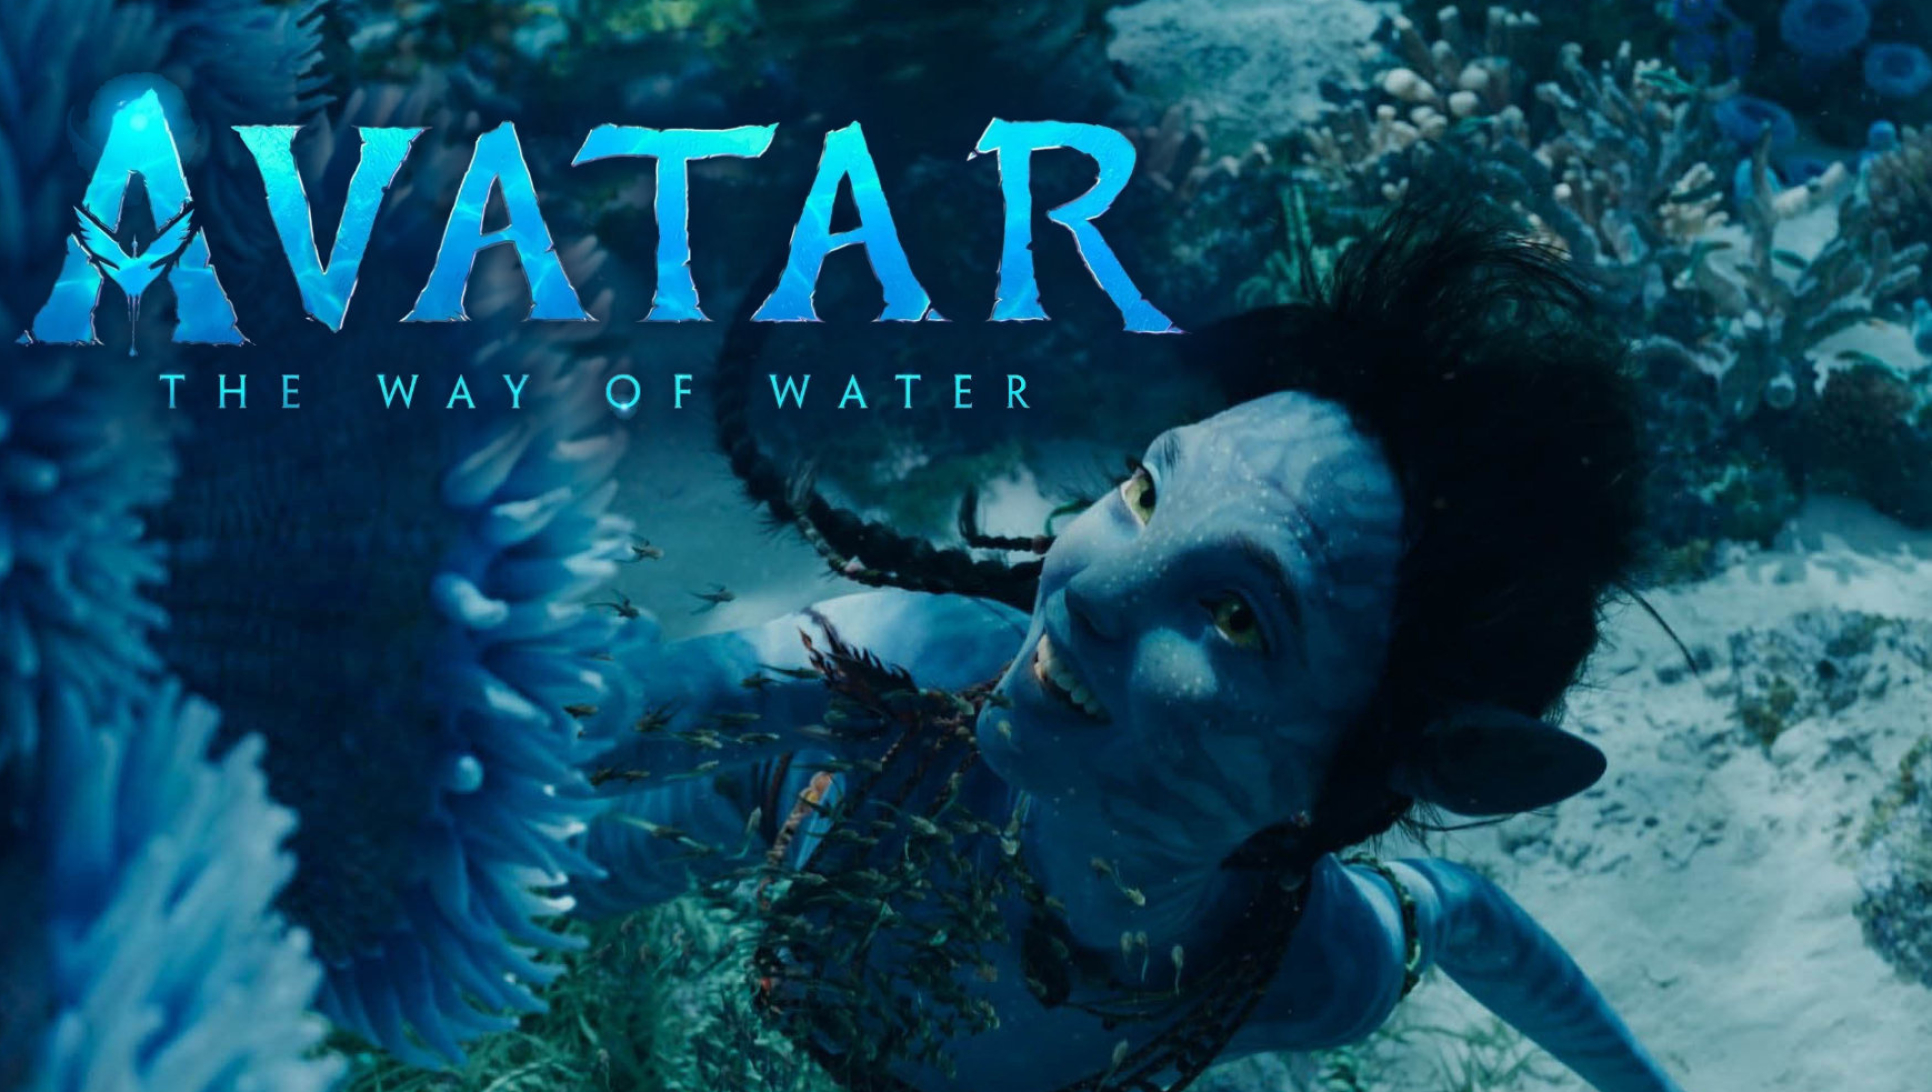 Avatar: The Way of Water, First look, Trailer release, Future of the franchise, 1940x1100 HD Desktop